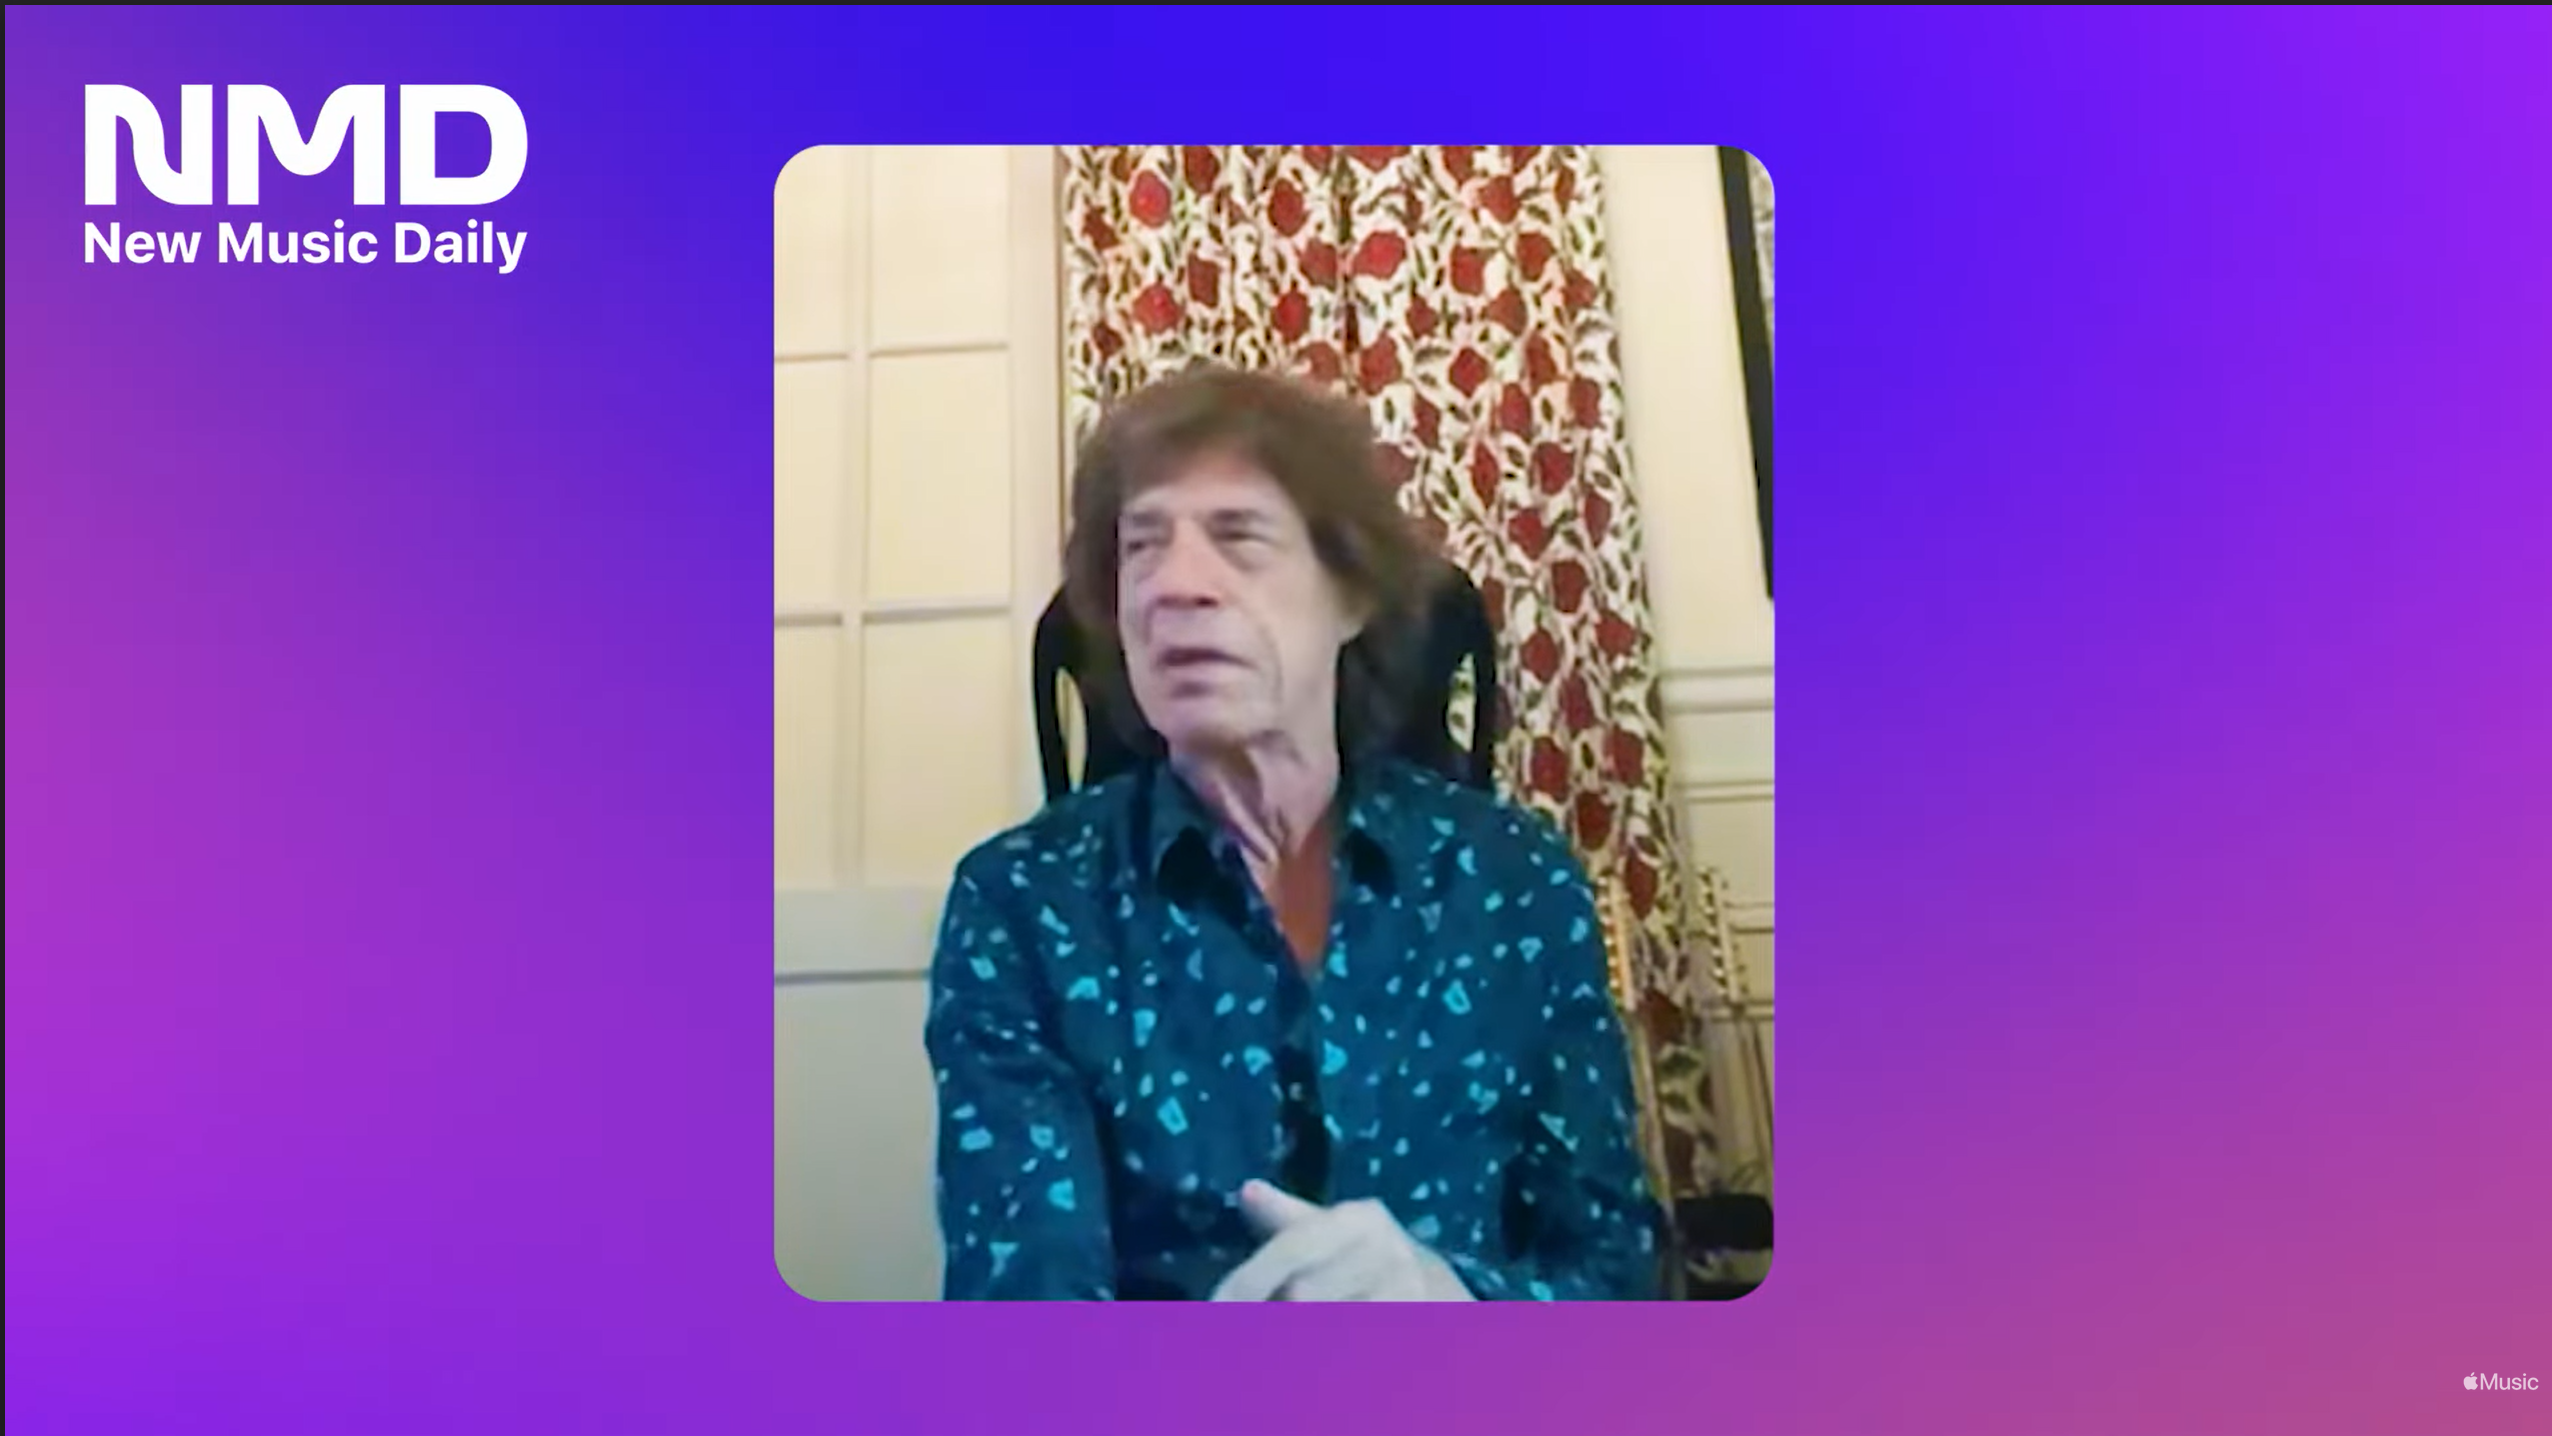 Mick Jagger Tells Apple Music About Working With Lady Gaga and Stevie Wonder on New Rolling Stones Song "Sweet Sounds Of Heaven", How Paul McCartney Ended Up on The New Album, and More